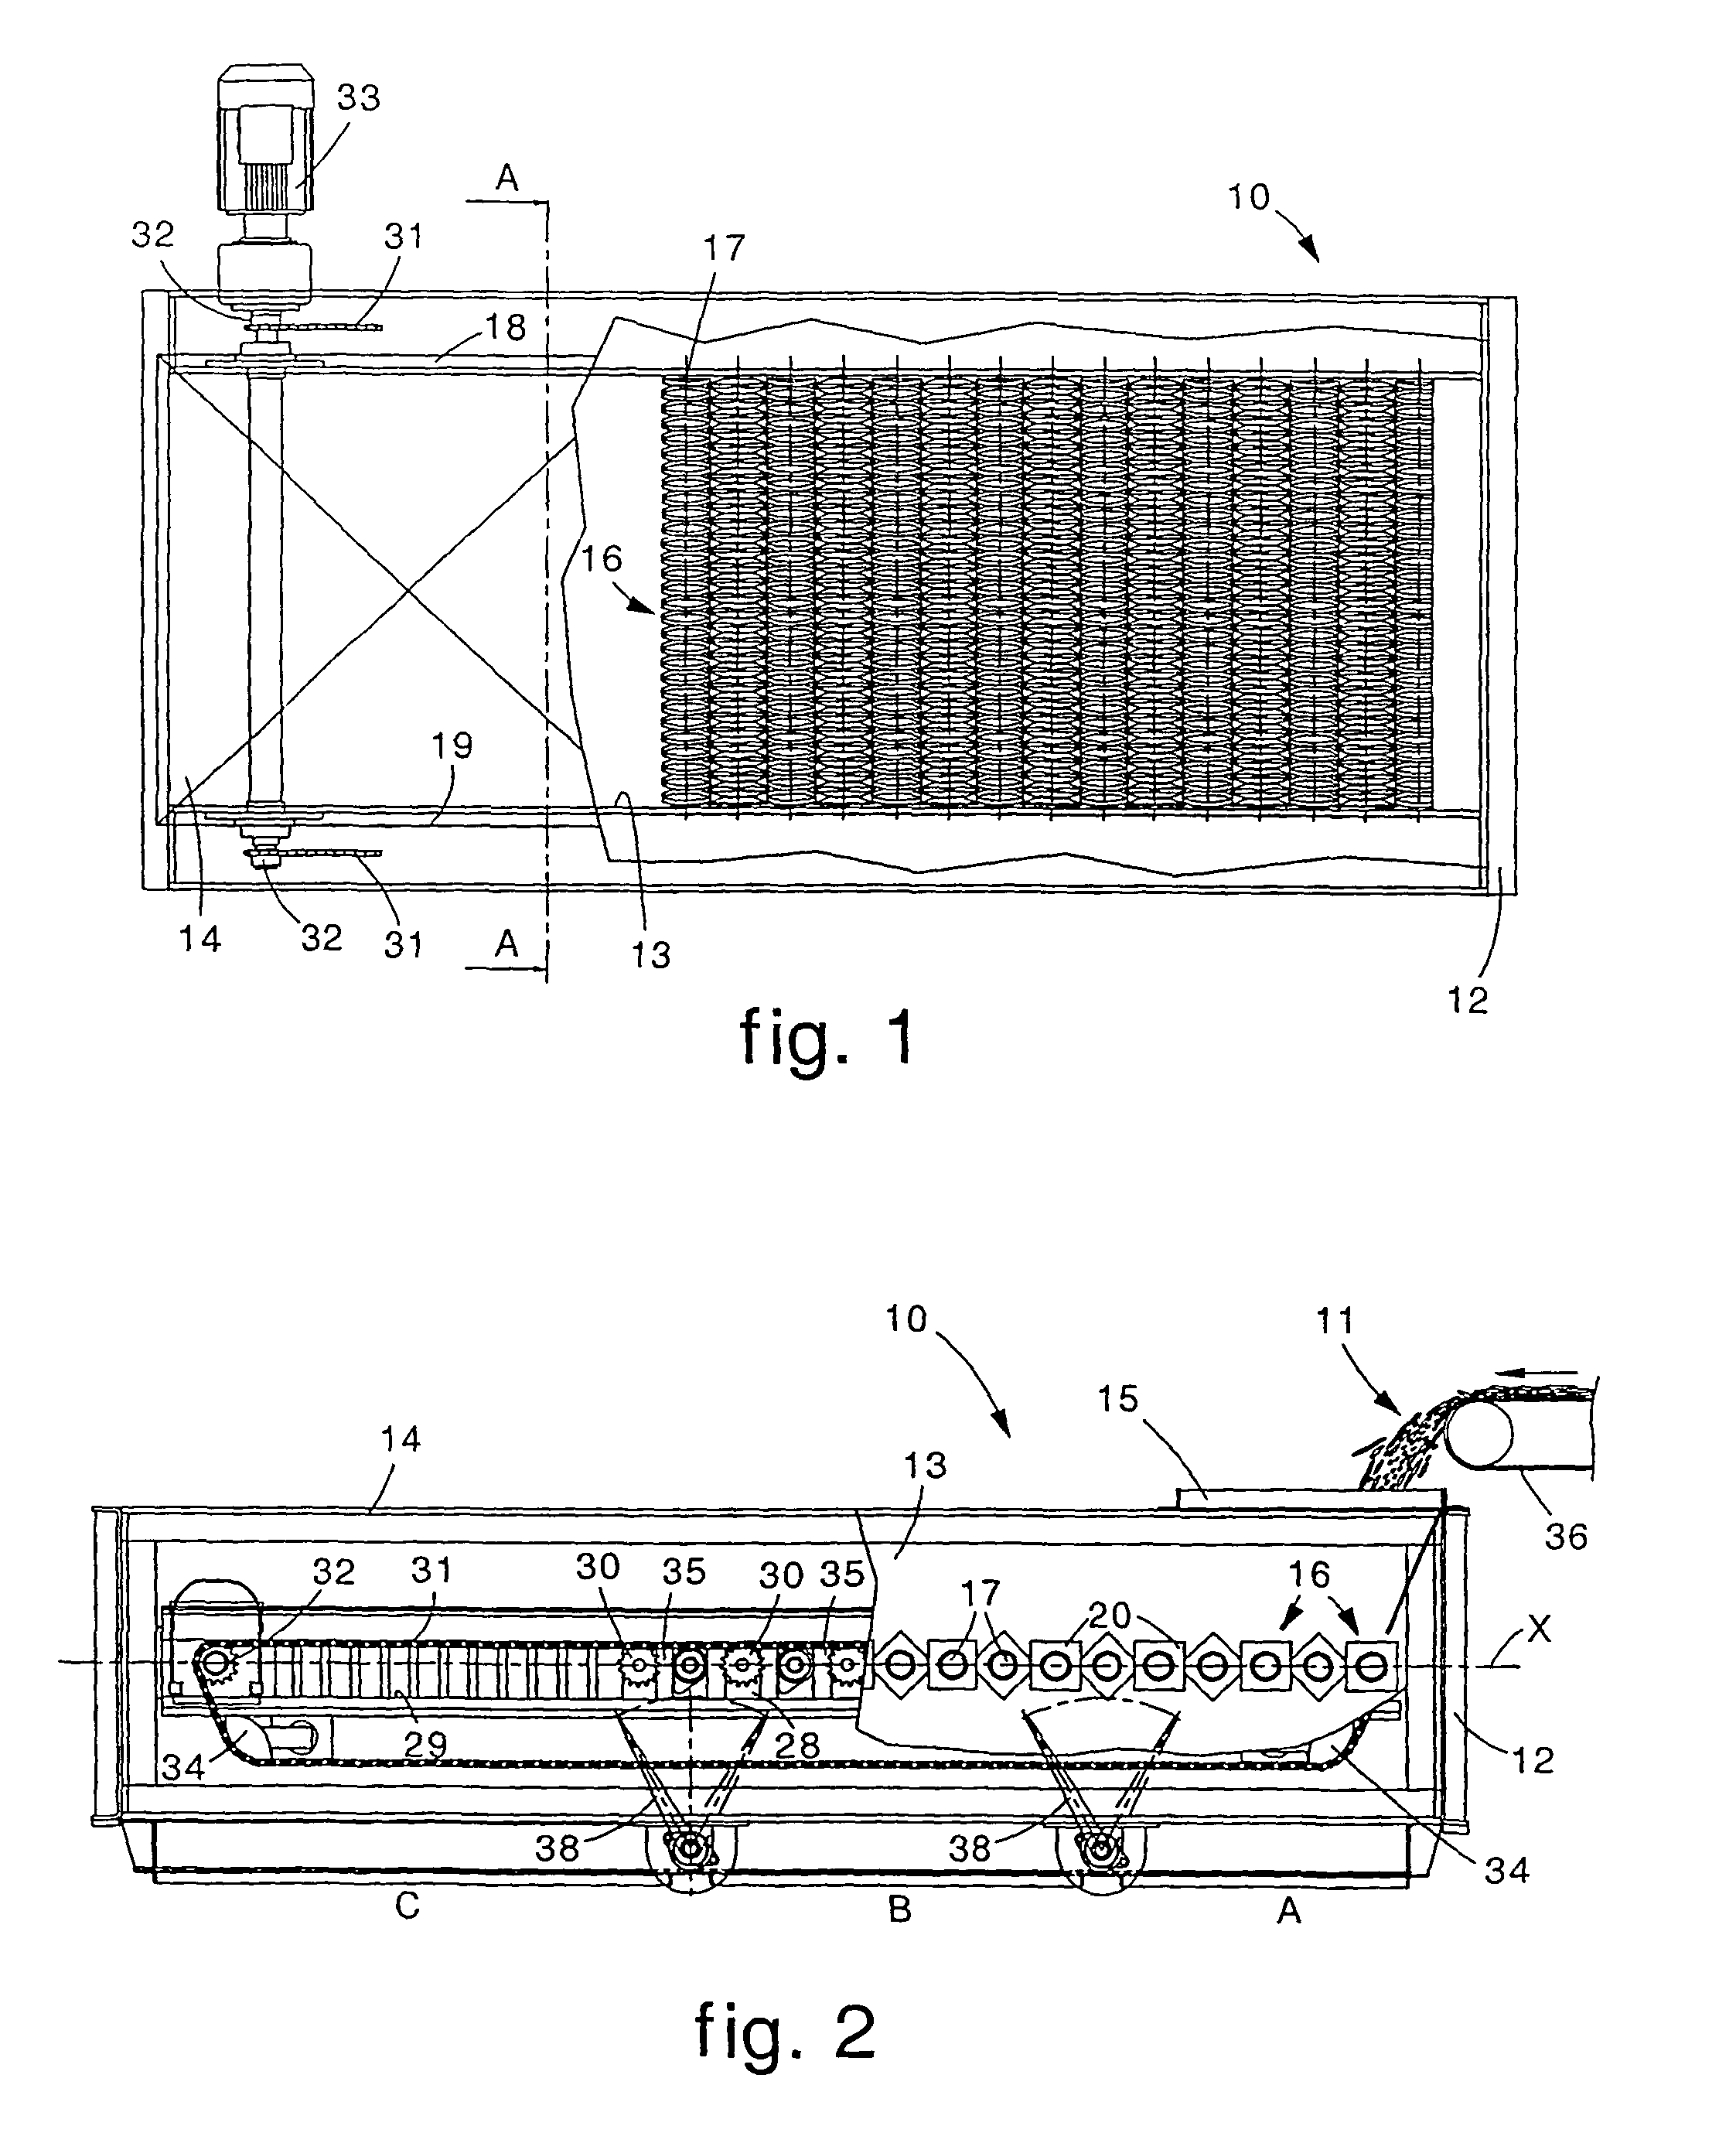 Apparatus and method to separate elements or materials of different sizes